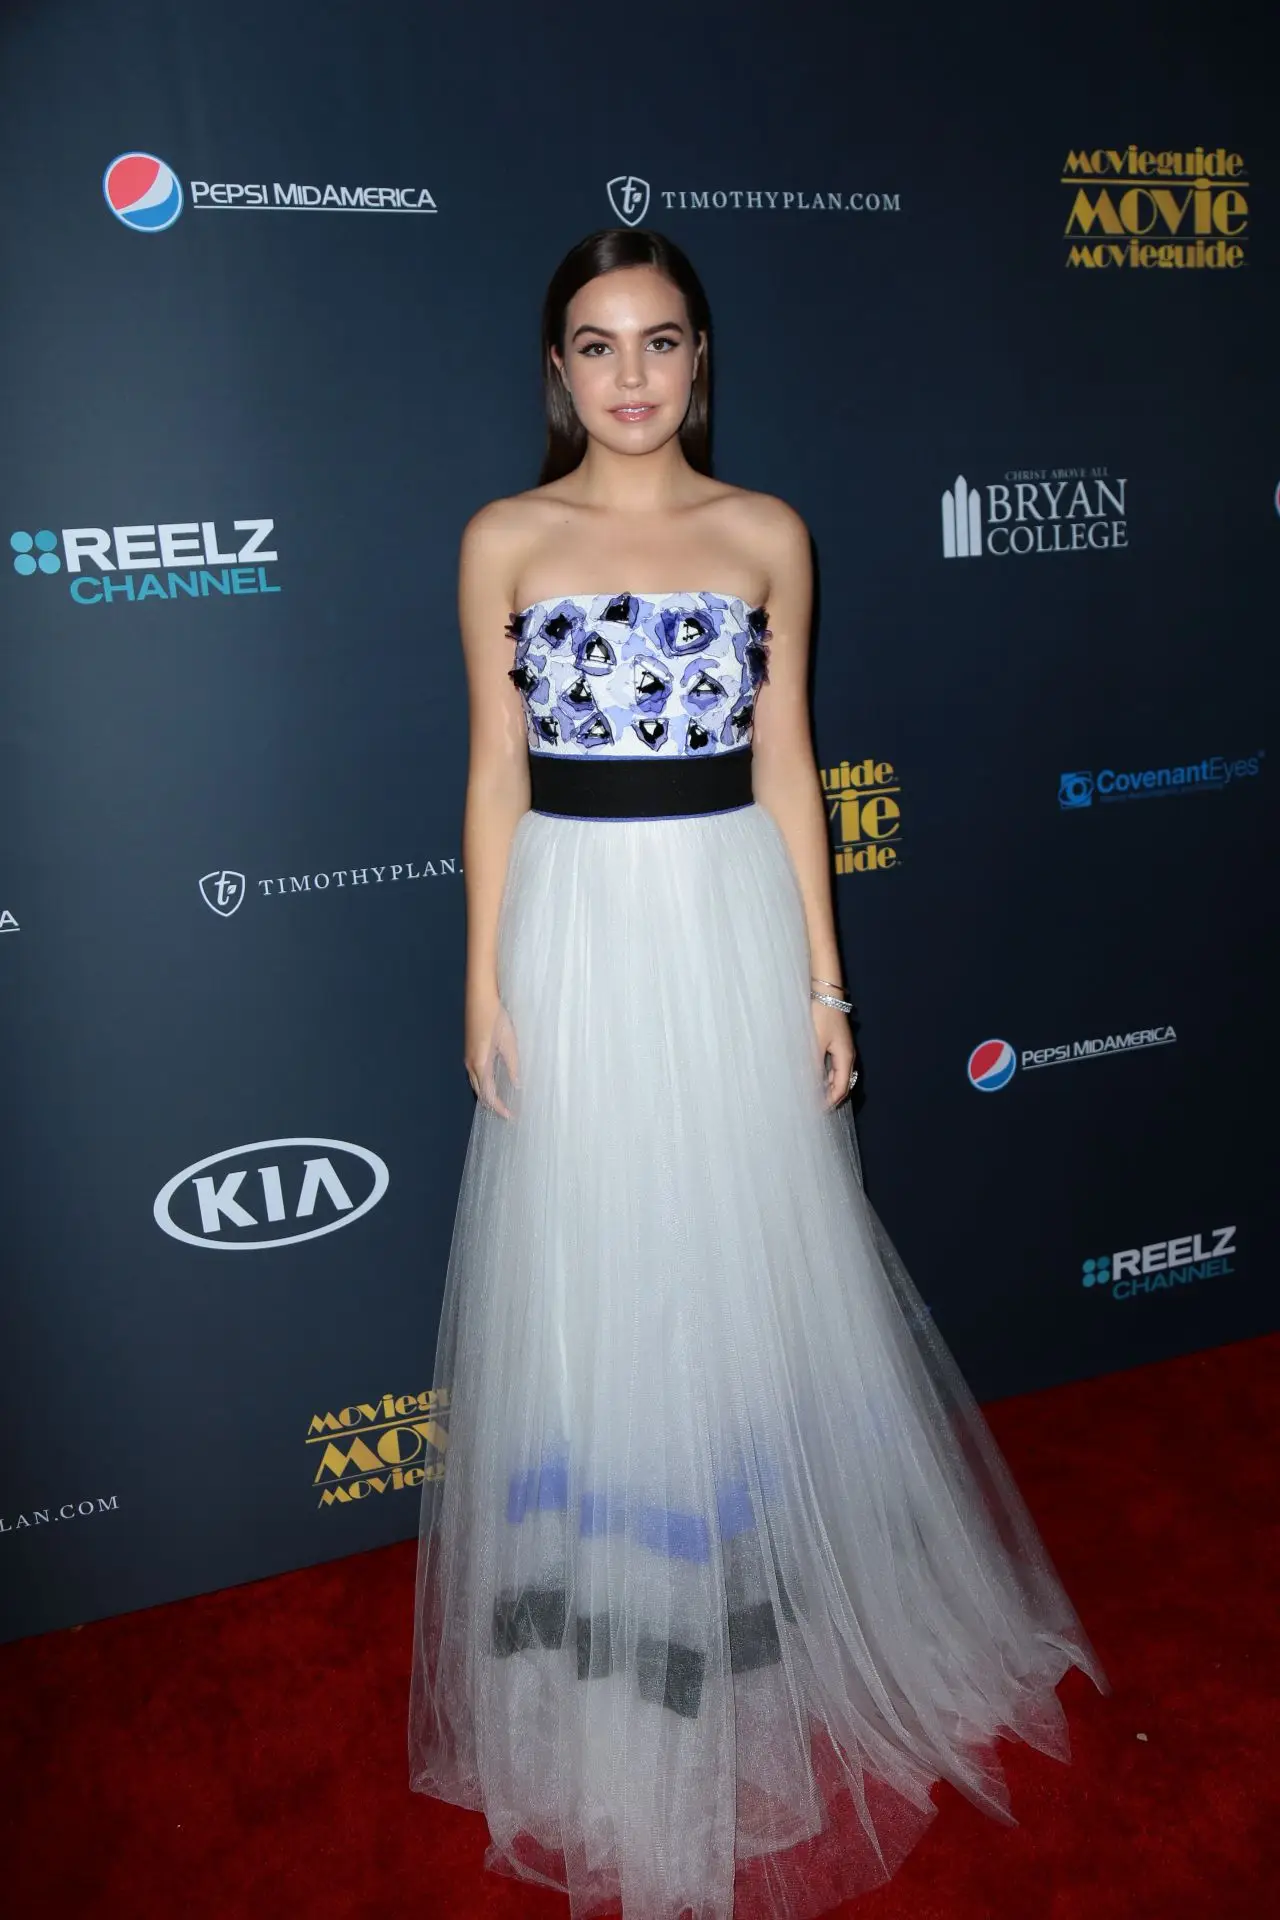 BAILEE MADISON AT 25TH ANNUAL MOVIEGUIDE AWARDS IN UNIVERSAL CITY08